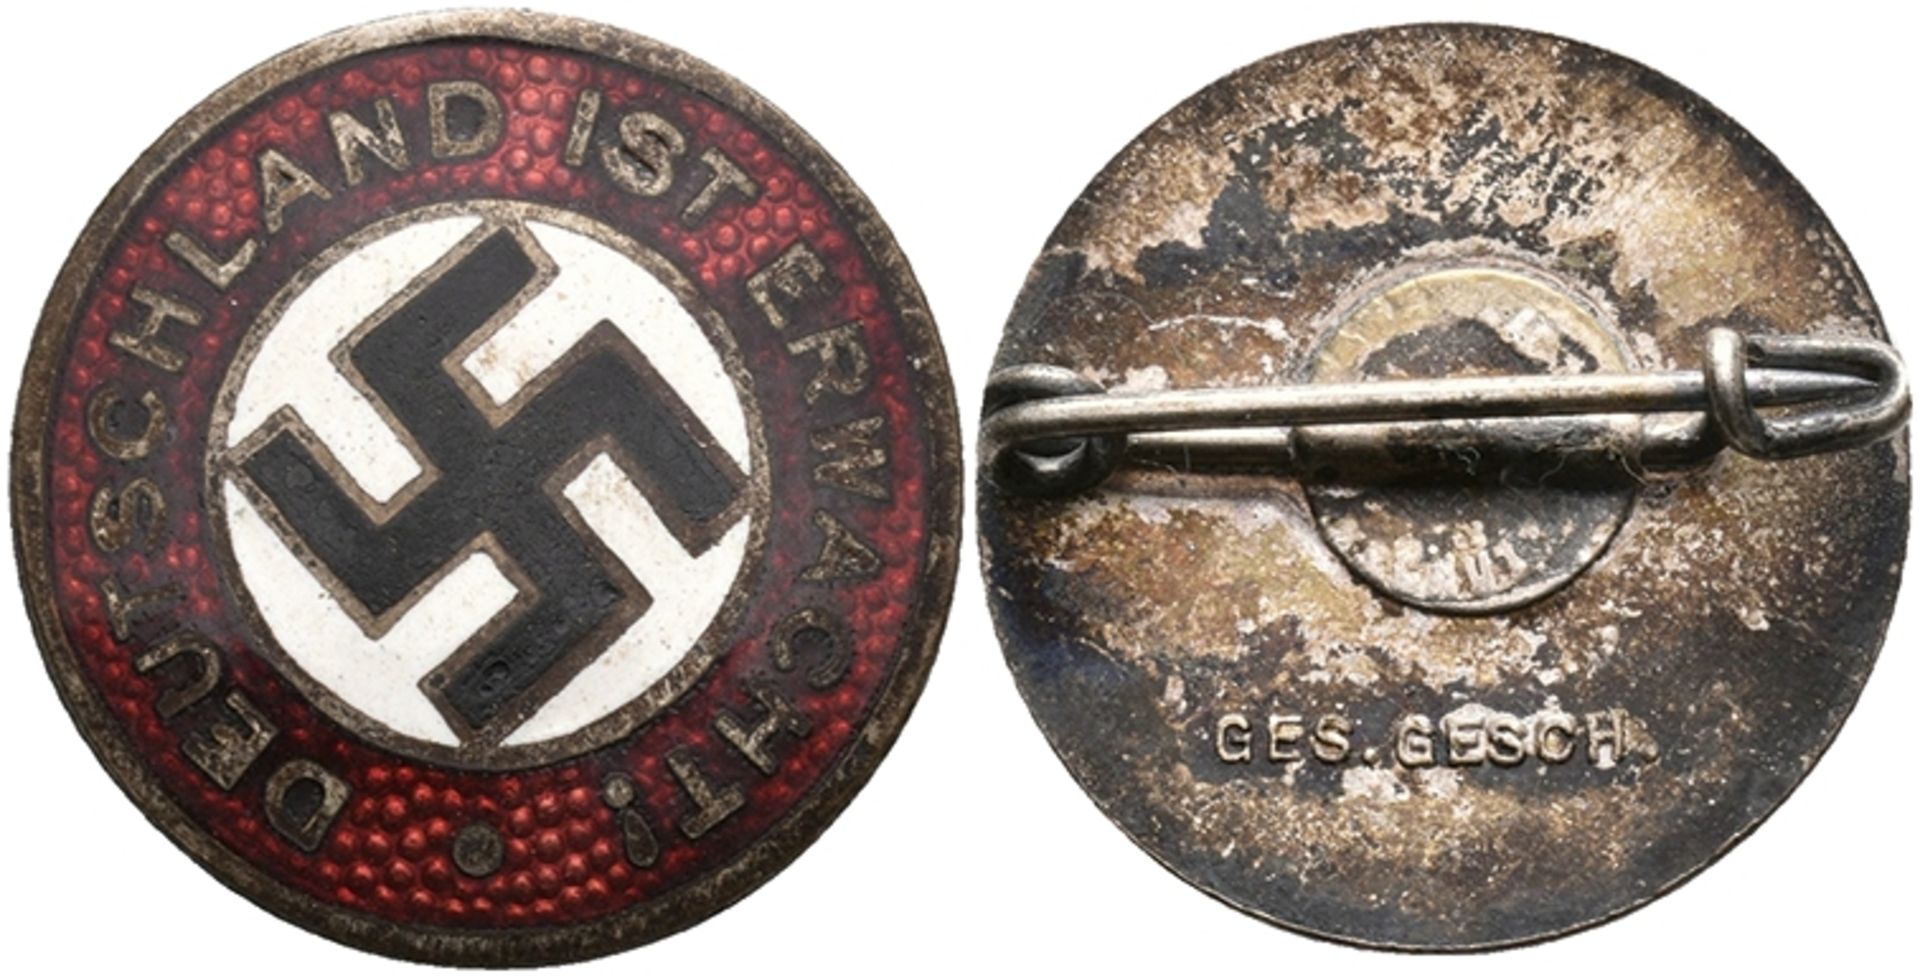 National Socialist sympathy emblem, 23 mm, enameled, \\Germany is awakes\\, on the reverse side with